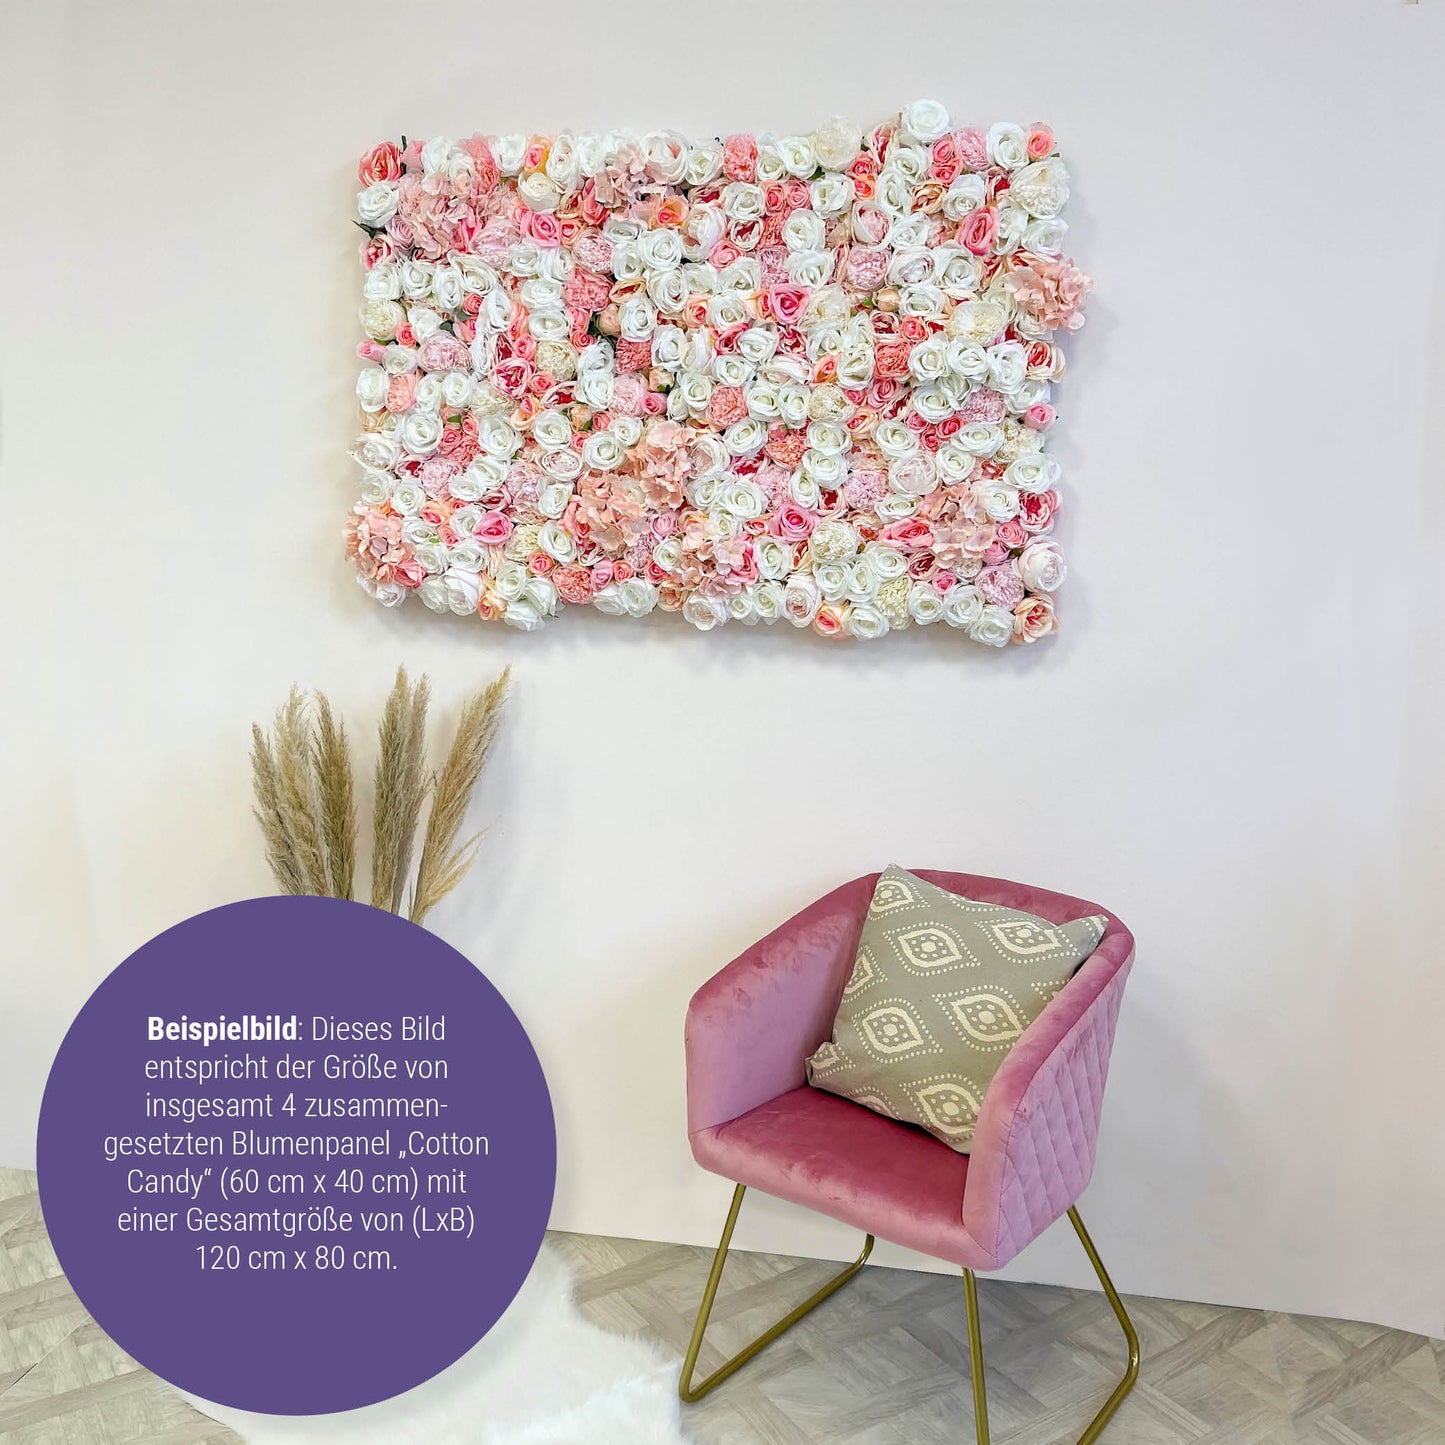 Flower panel "COTTON CANDY" made of Realtouch artificial plants